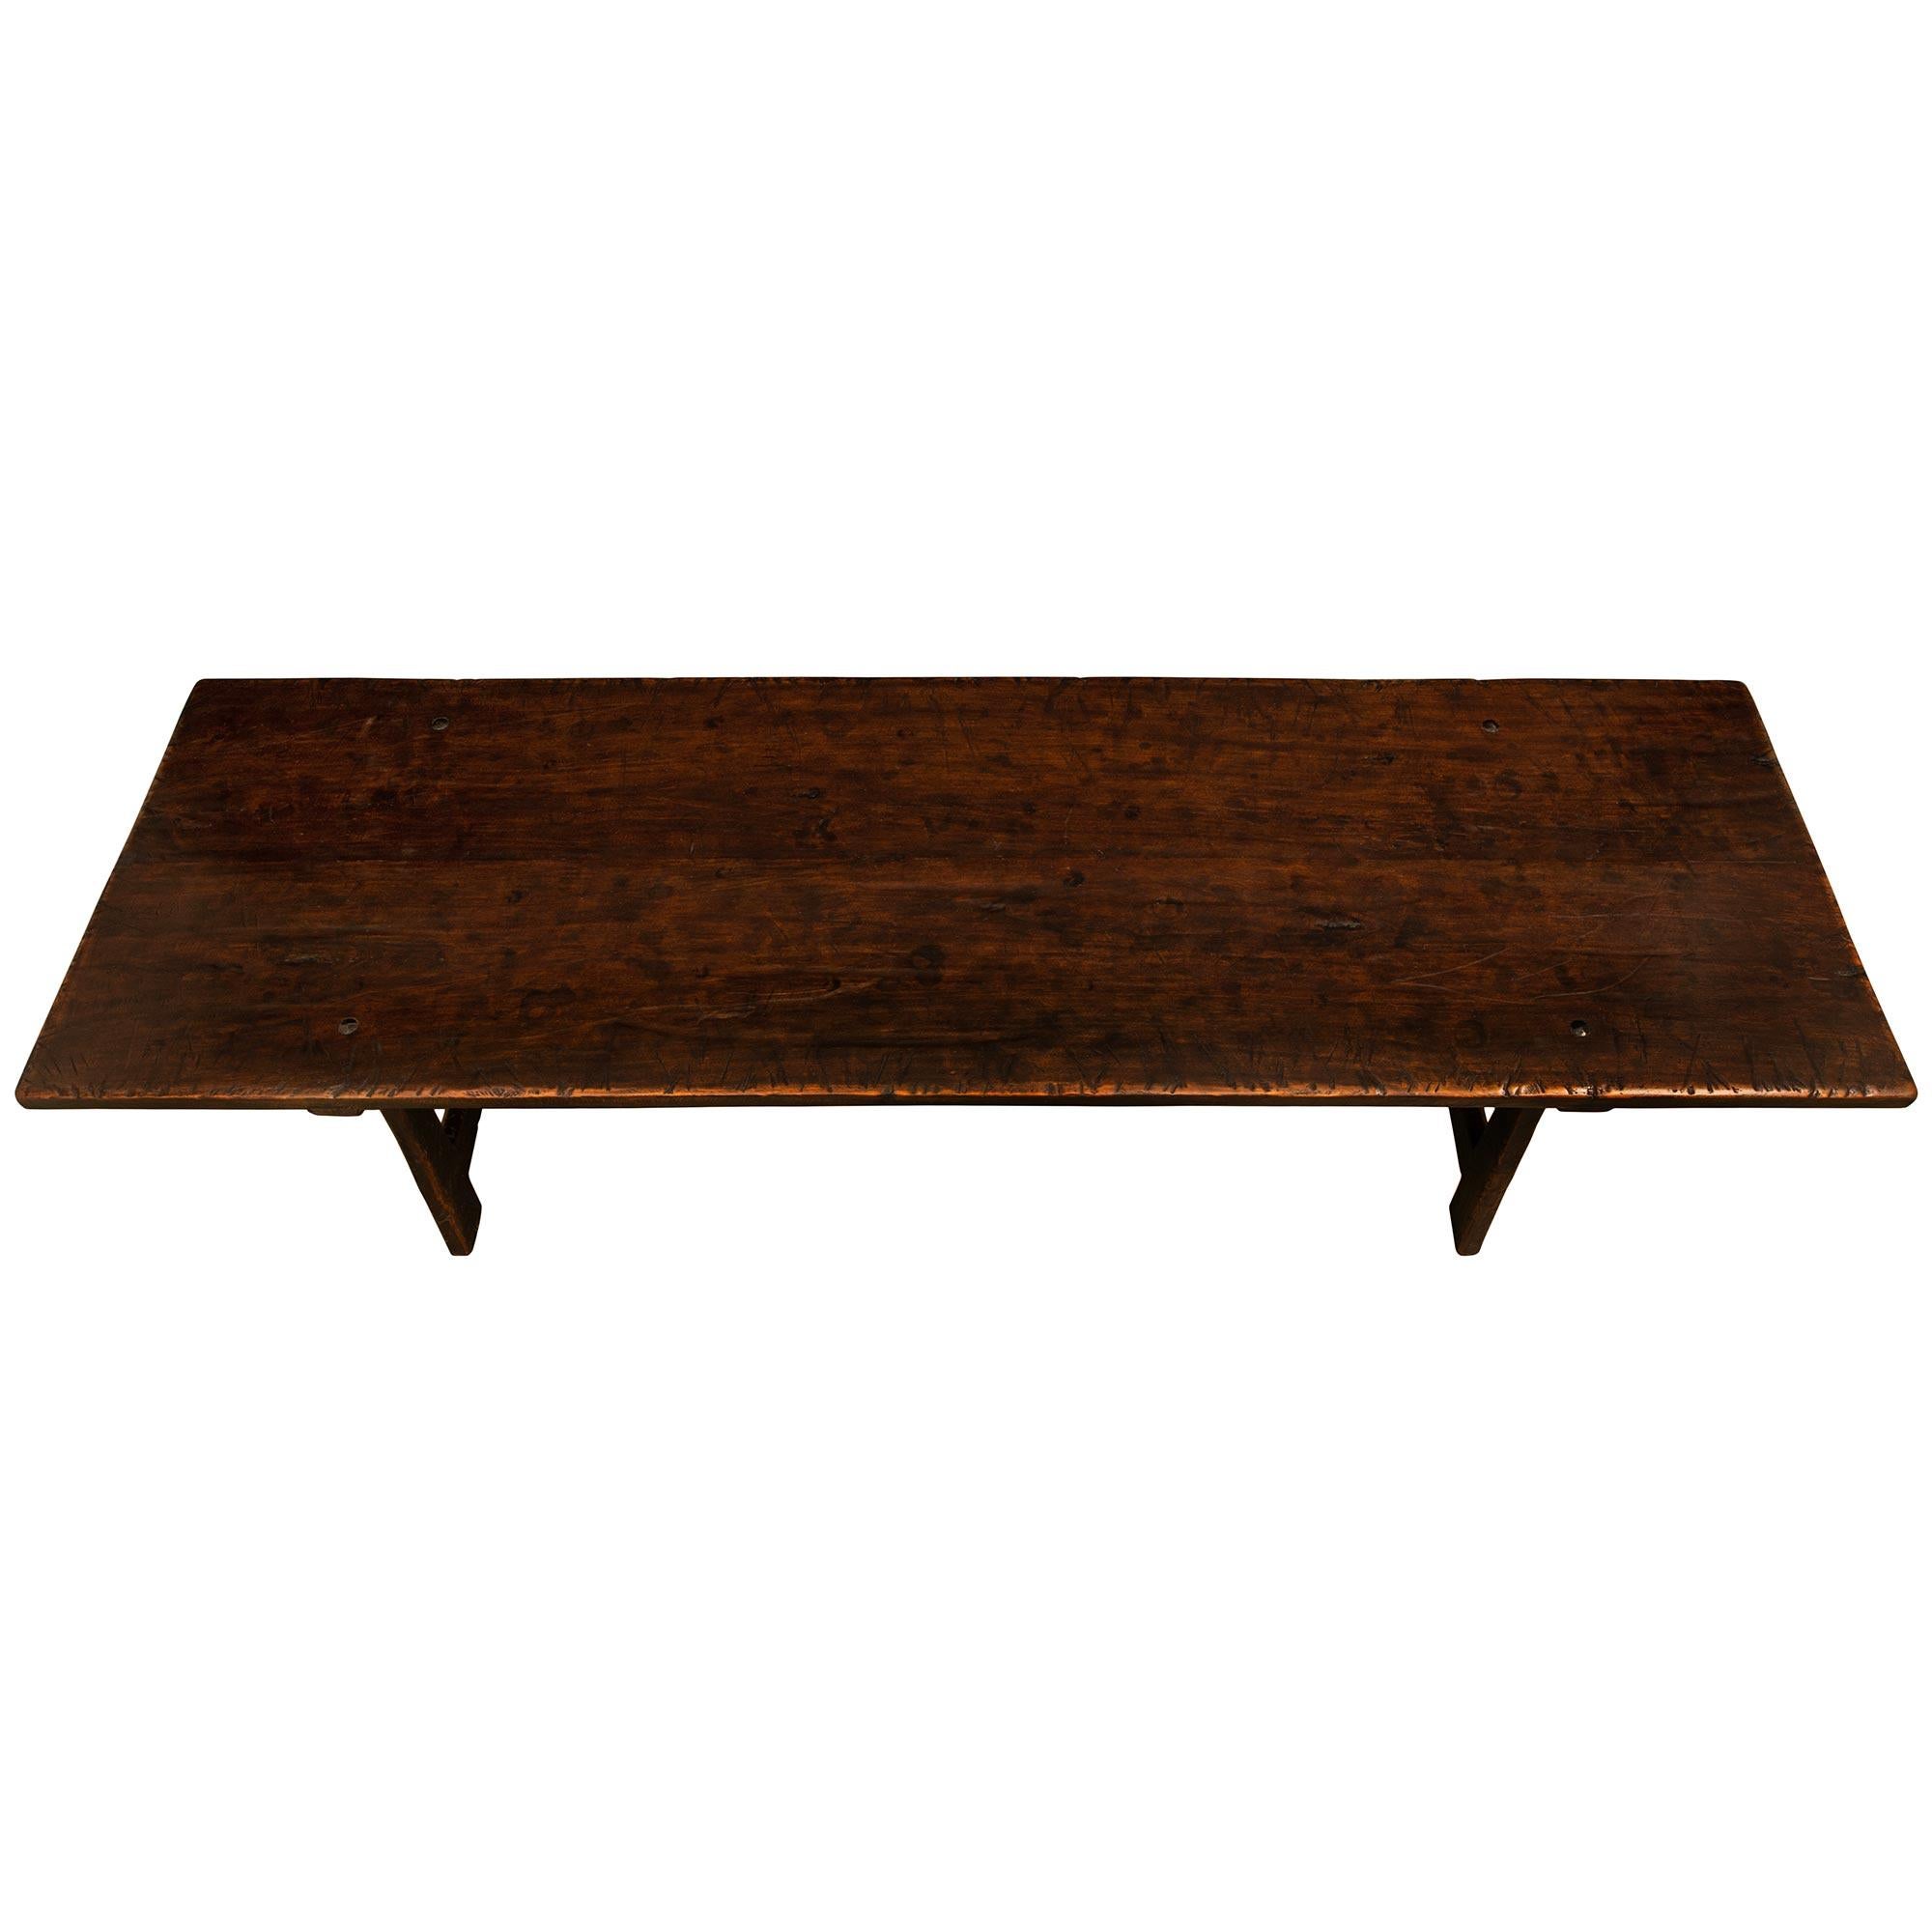 A handsome and large scale Italian 19th century Walnut trestle/dining table. The table is raised on four slanted tapered rectangular legs with straight and triangular shaped stretchers connecting the legs. Above is the solid Walnut rectangular top